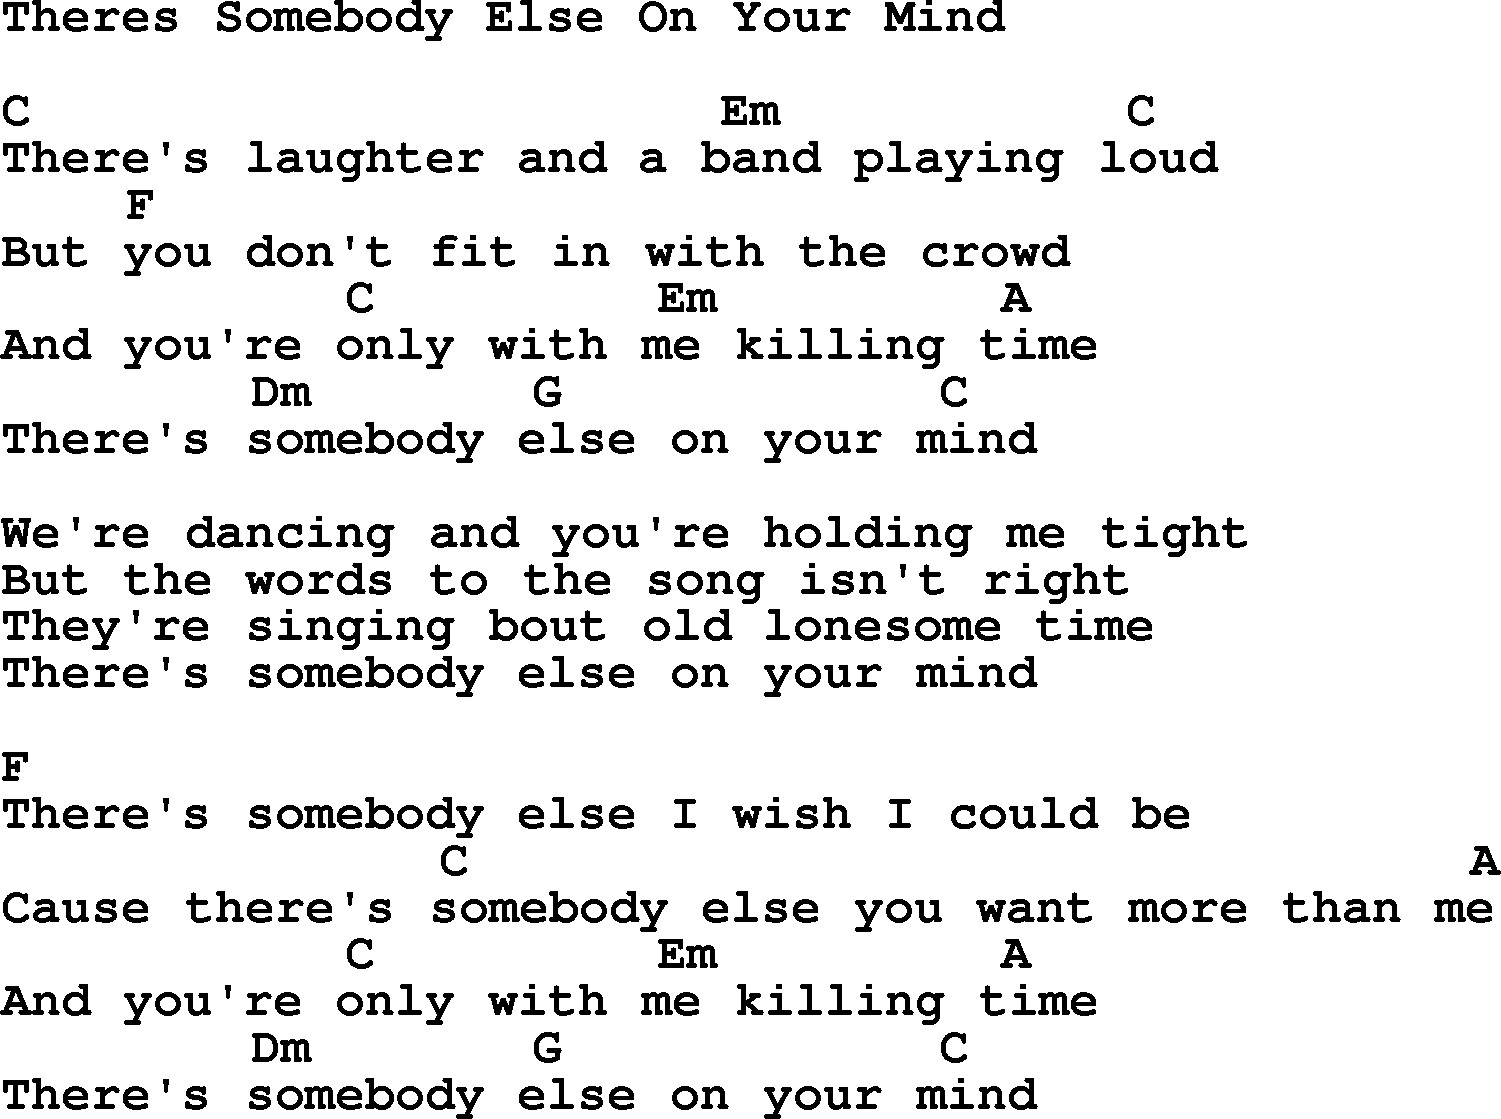 Merle Haggard song: Theres Somebody Else On Your Mind, lyrics and chords